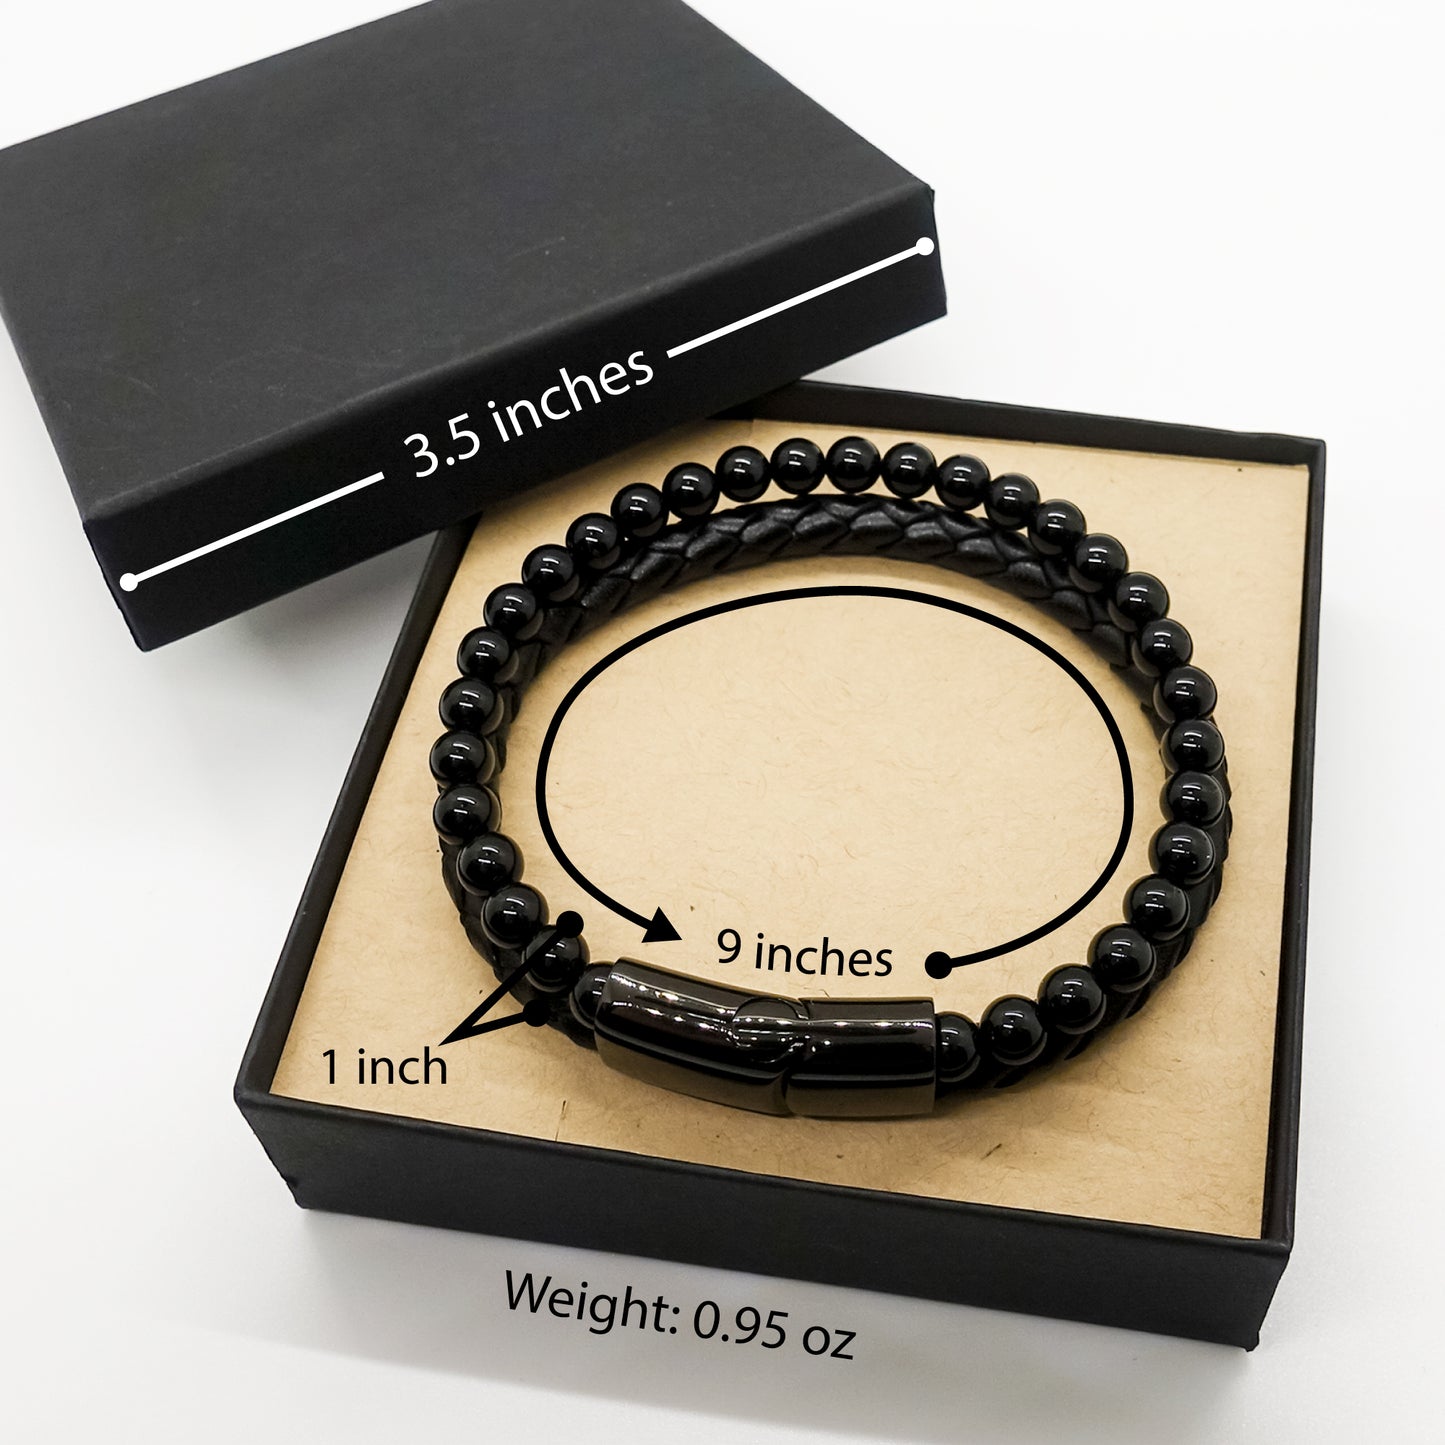 Stepson Motivational Gifts from Stepdad, Remember to never give up no matter what, Inspirational Birthday Stone Leather Bracelets for Stepson